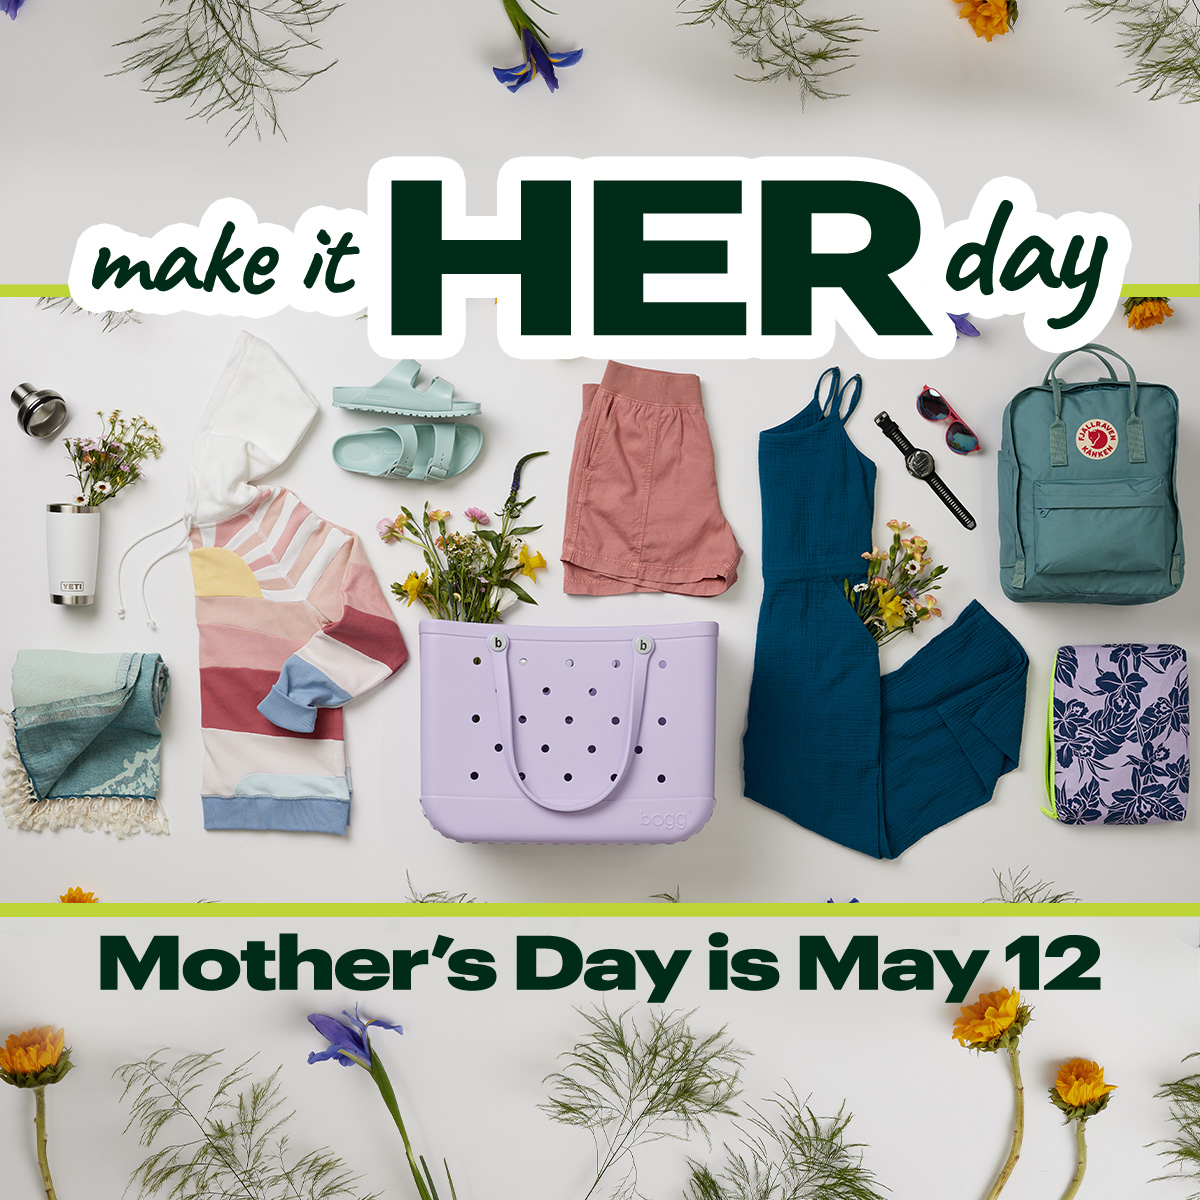  Make it her day. Mother's Day is May 12.